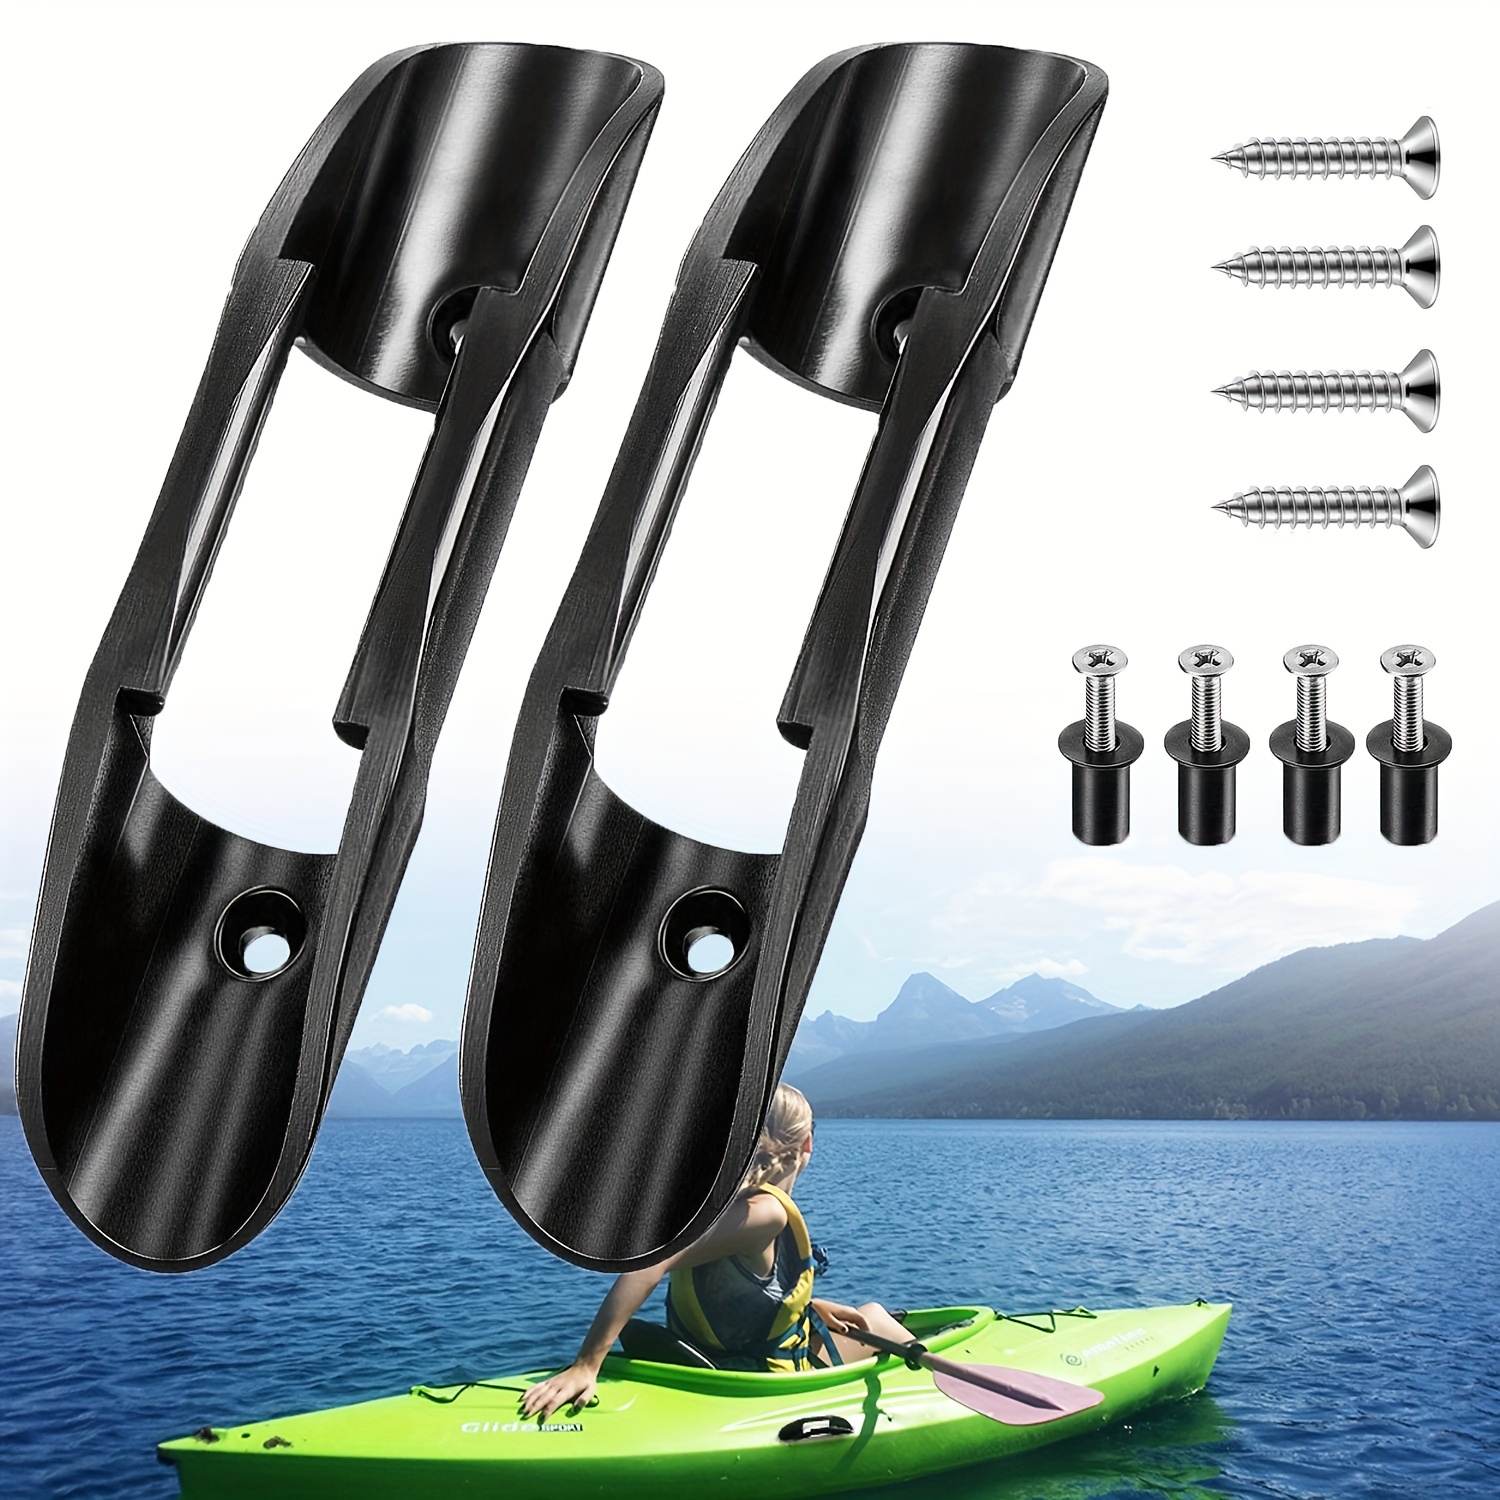 2/4pcs Universal Kayak Paddle and Fishing Net Holder Clips with Screws -  Convenient Deck Mount for Easy Access and Storage